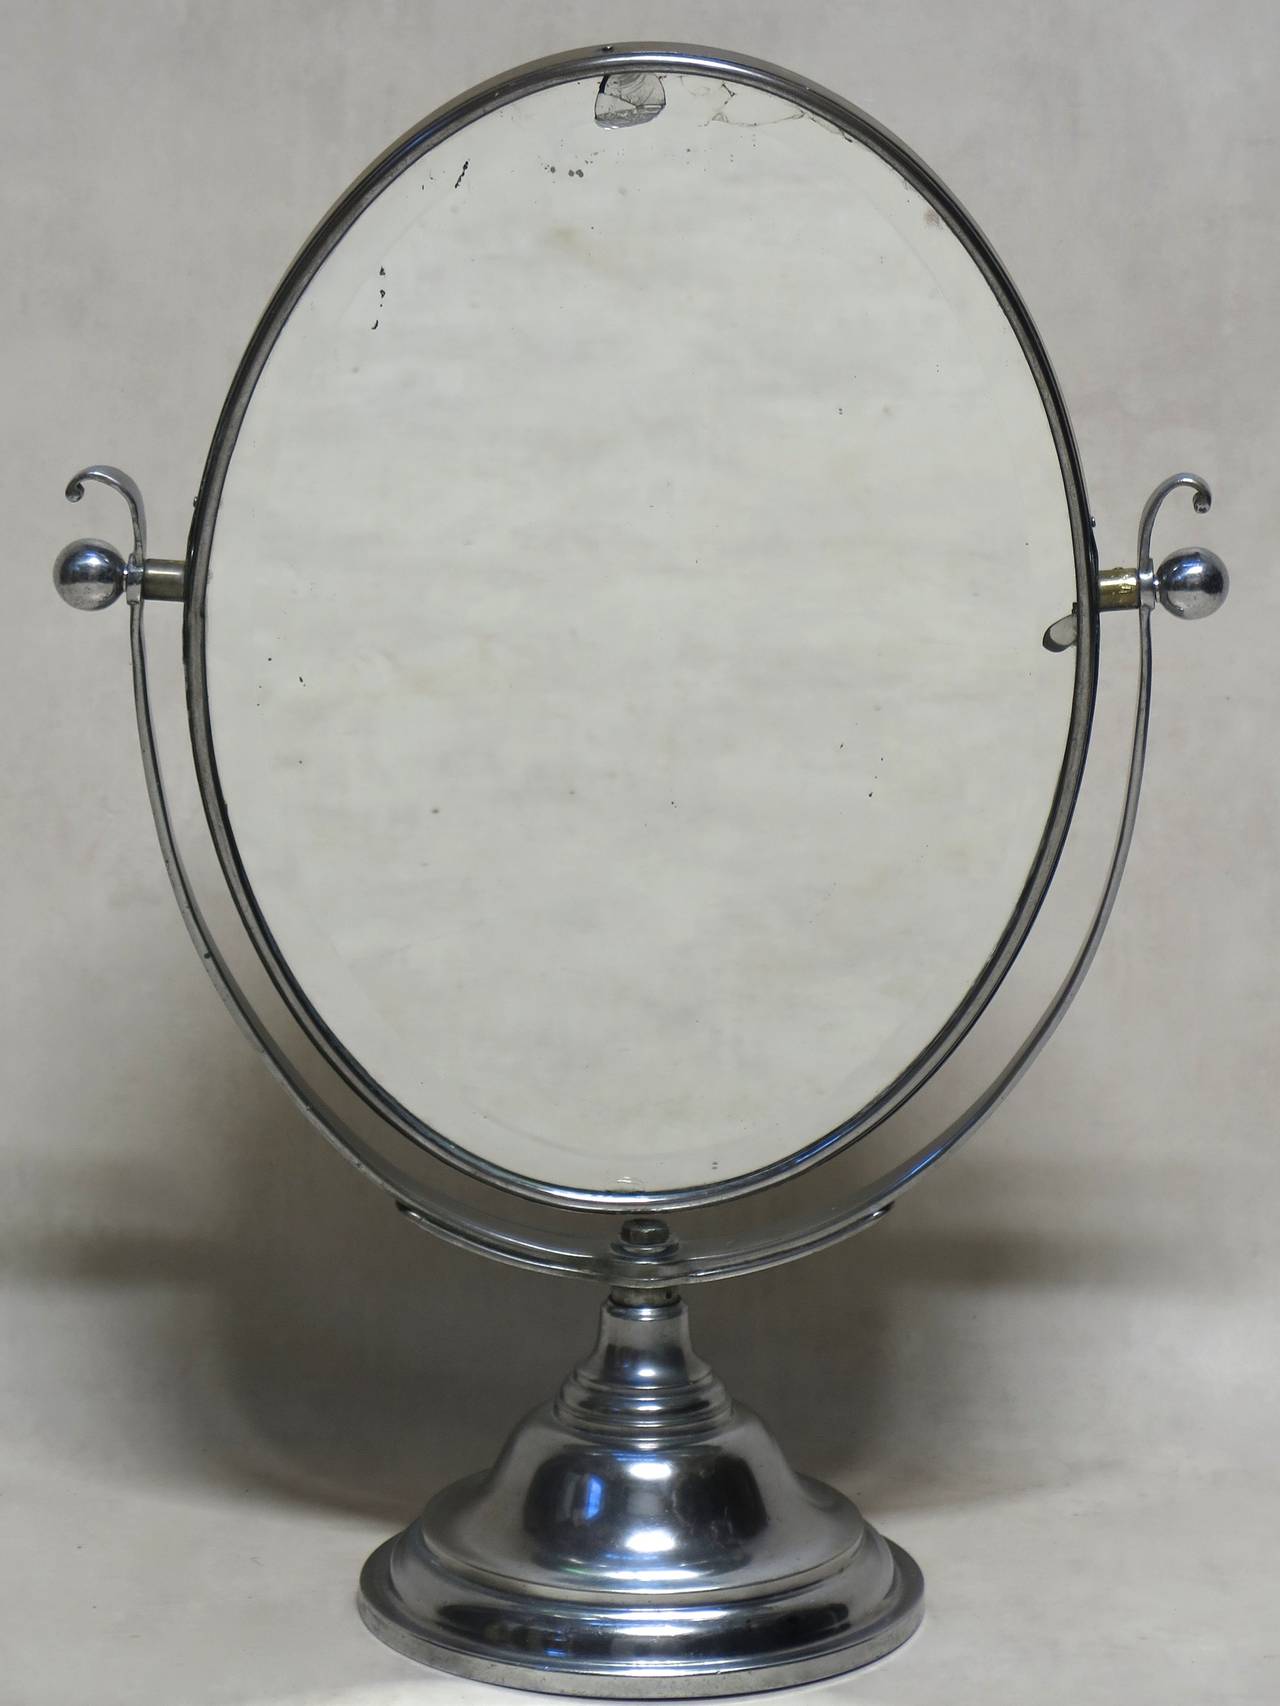 Large double-sided oval swivel vanity mirror with beveled edges.